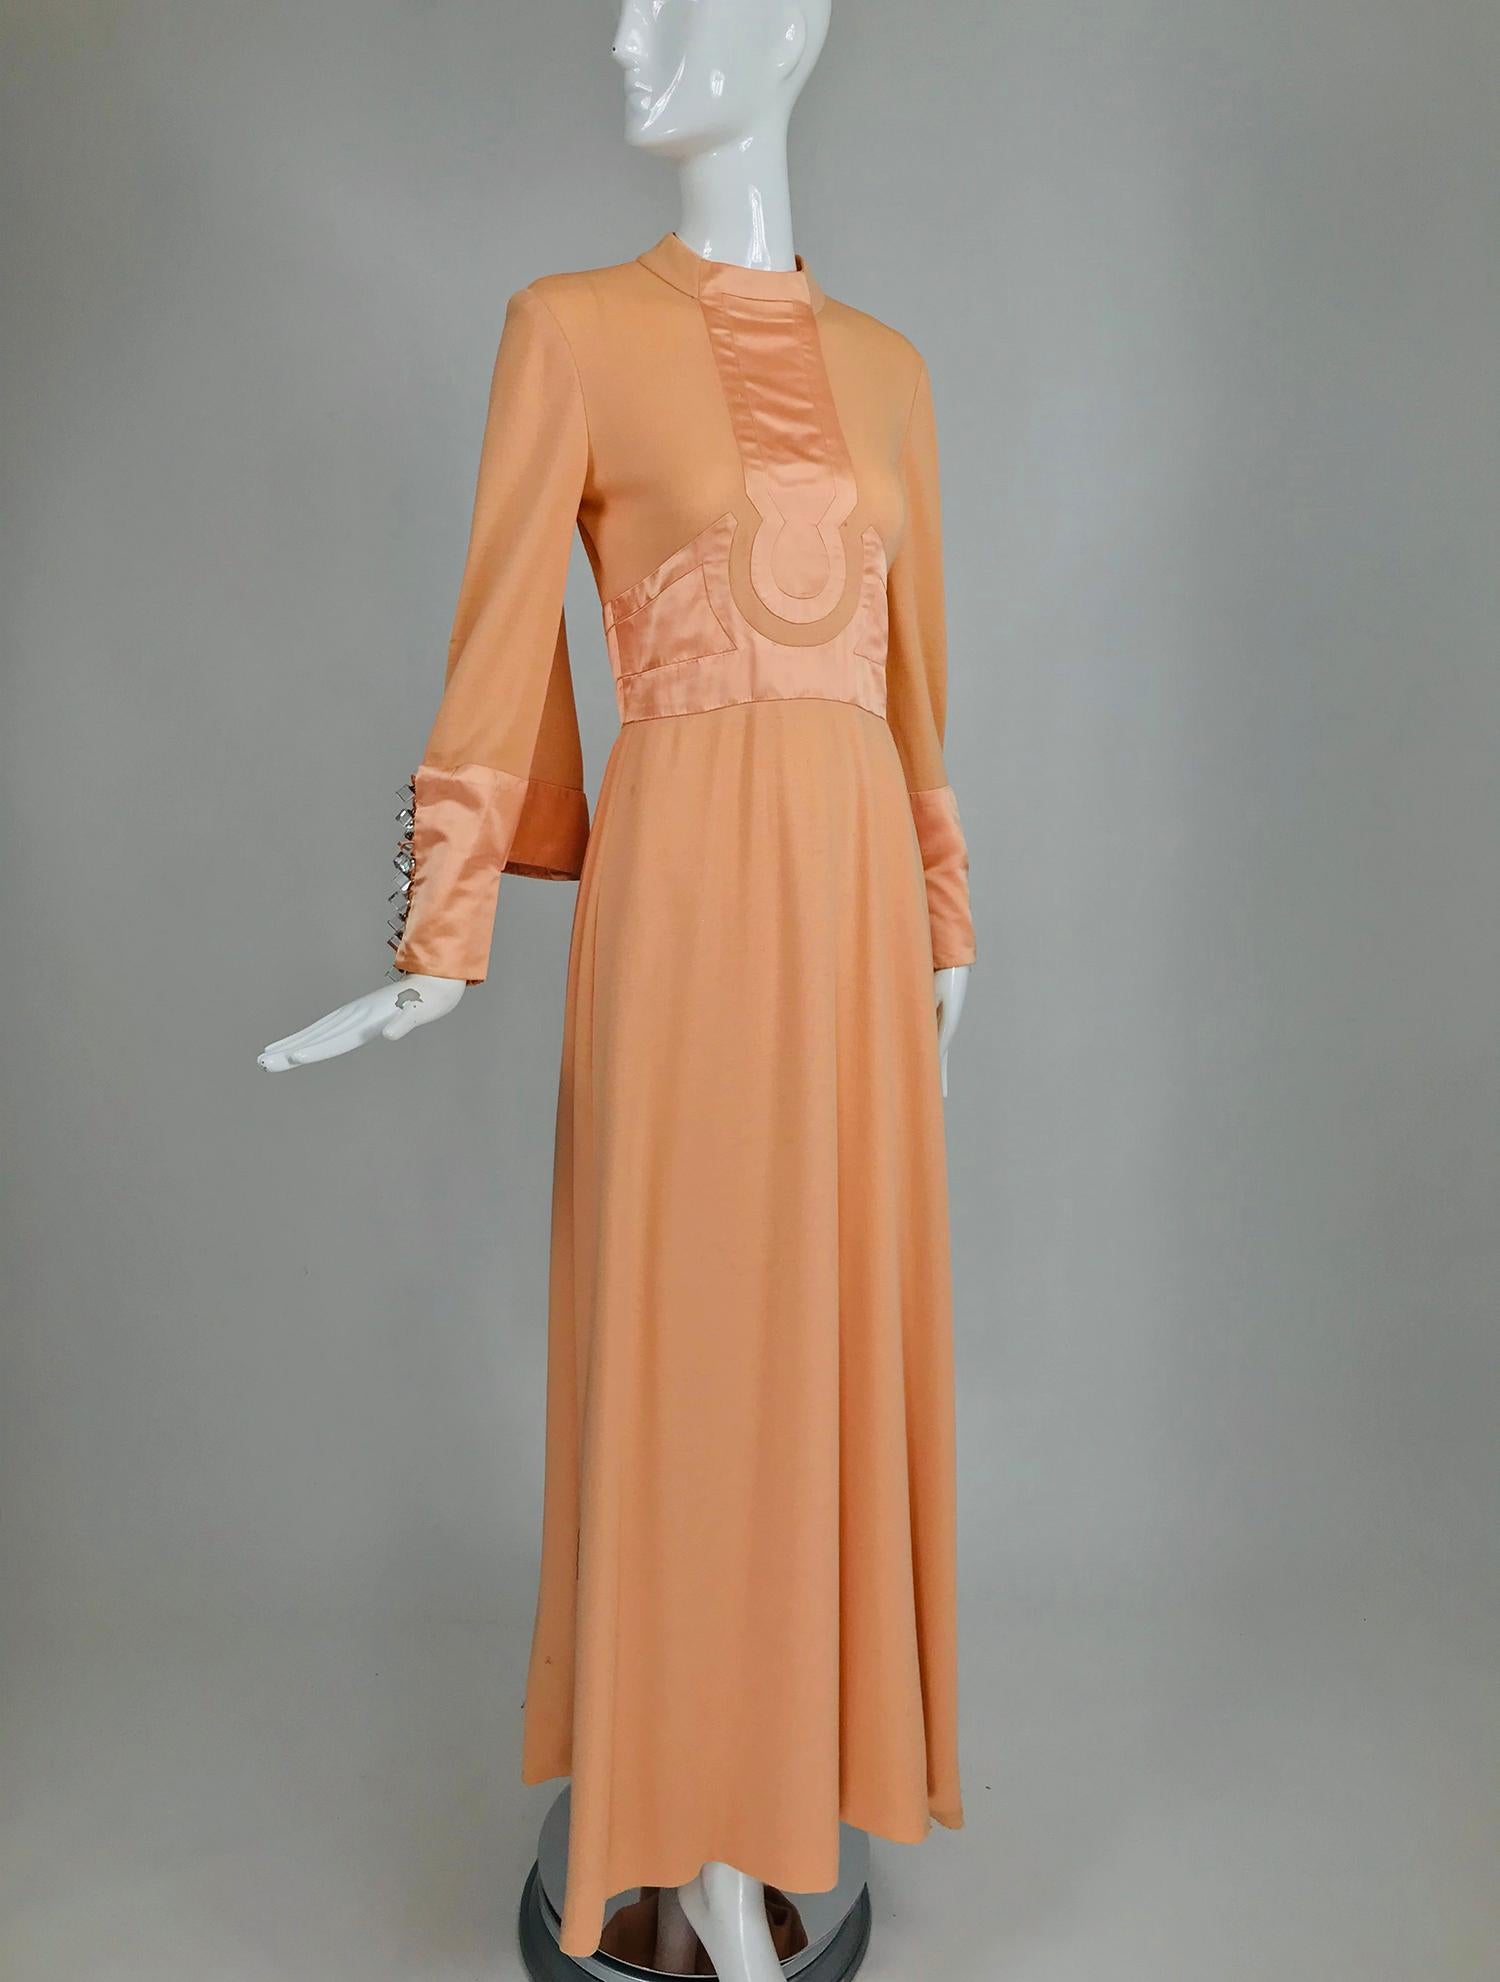 Ronald Amey peach wool knit gown with pieced satin bodice front and neck yoke from the 1960s. This beautiful dress has a Mod influenced design. The dress is beautifully constructed. In the day wool was regularly used for day and evening garments